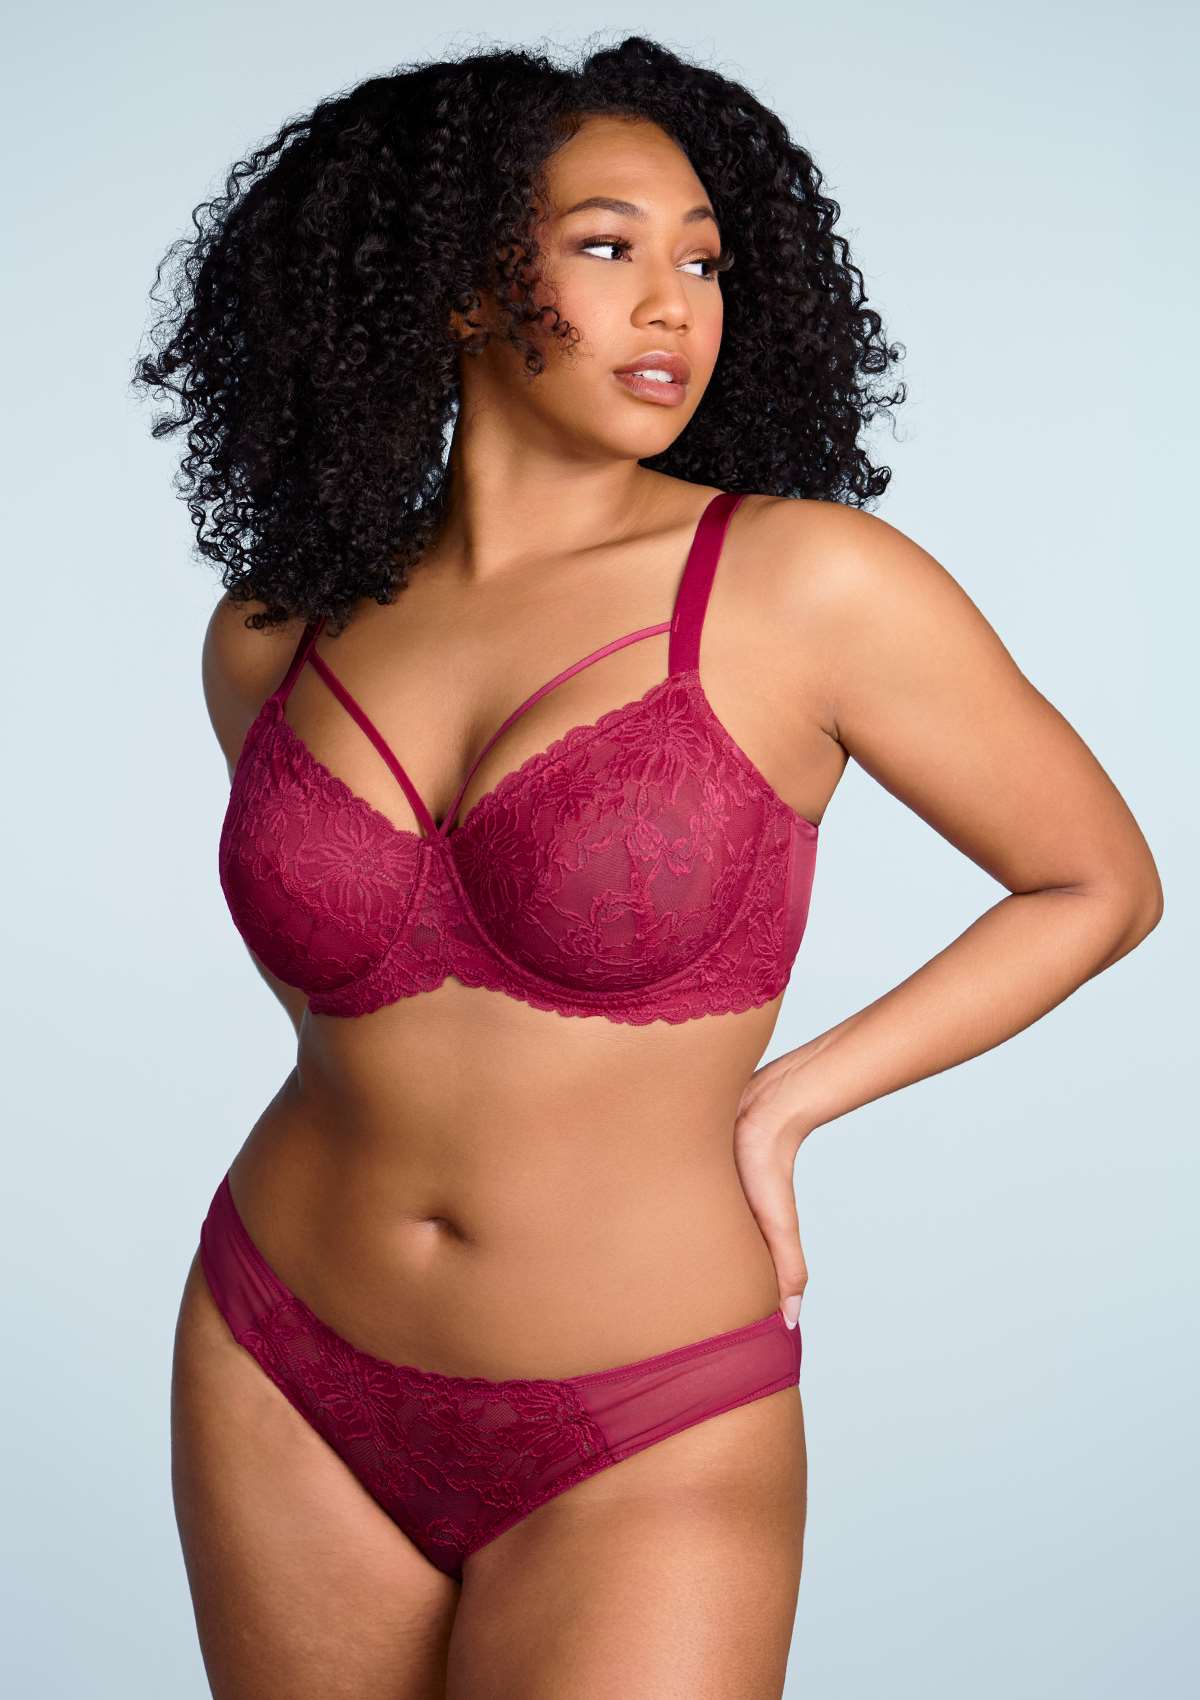 HSIA Pretty In Petals Lace Panties And Bra Set: Plus Size Women Bra - Red / 32 / DD/E